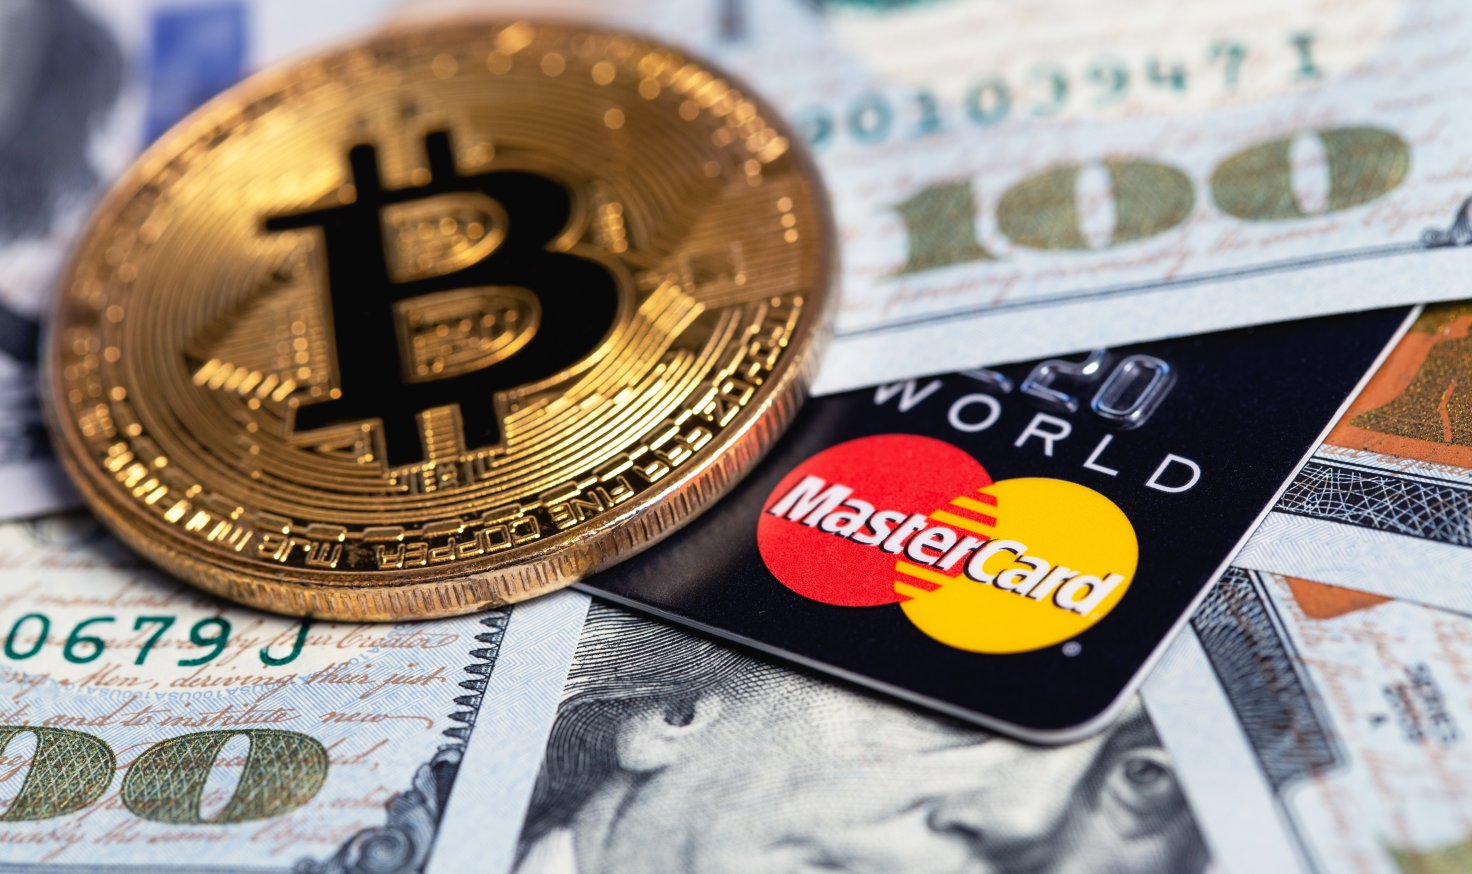 mastercard cryptocurrency card